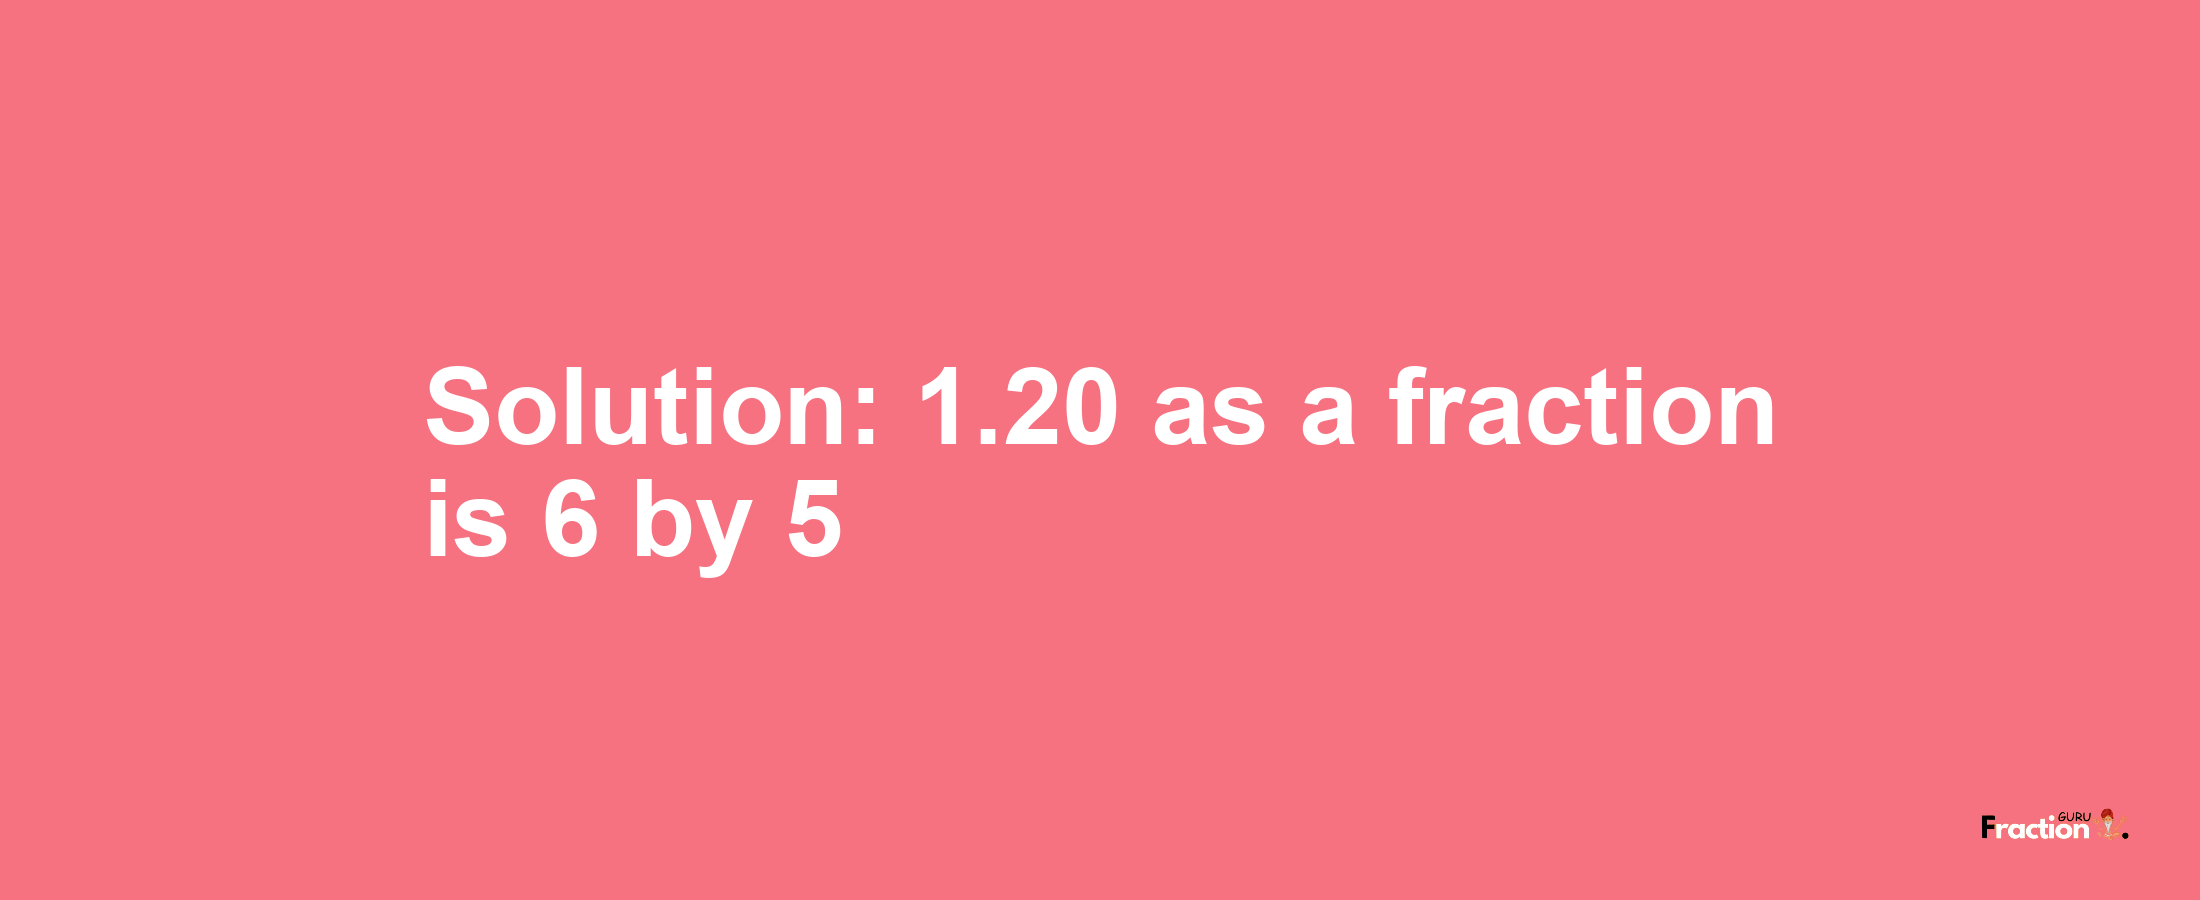 Solution:1.20 as a fraction is 6/5